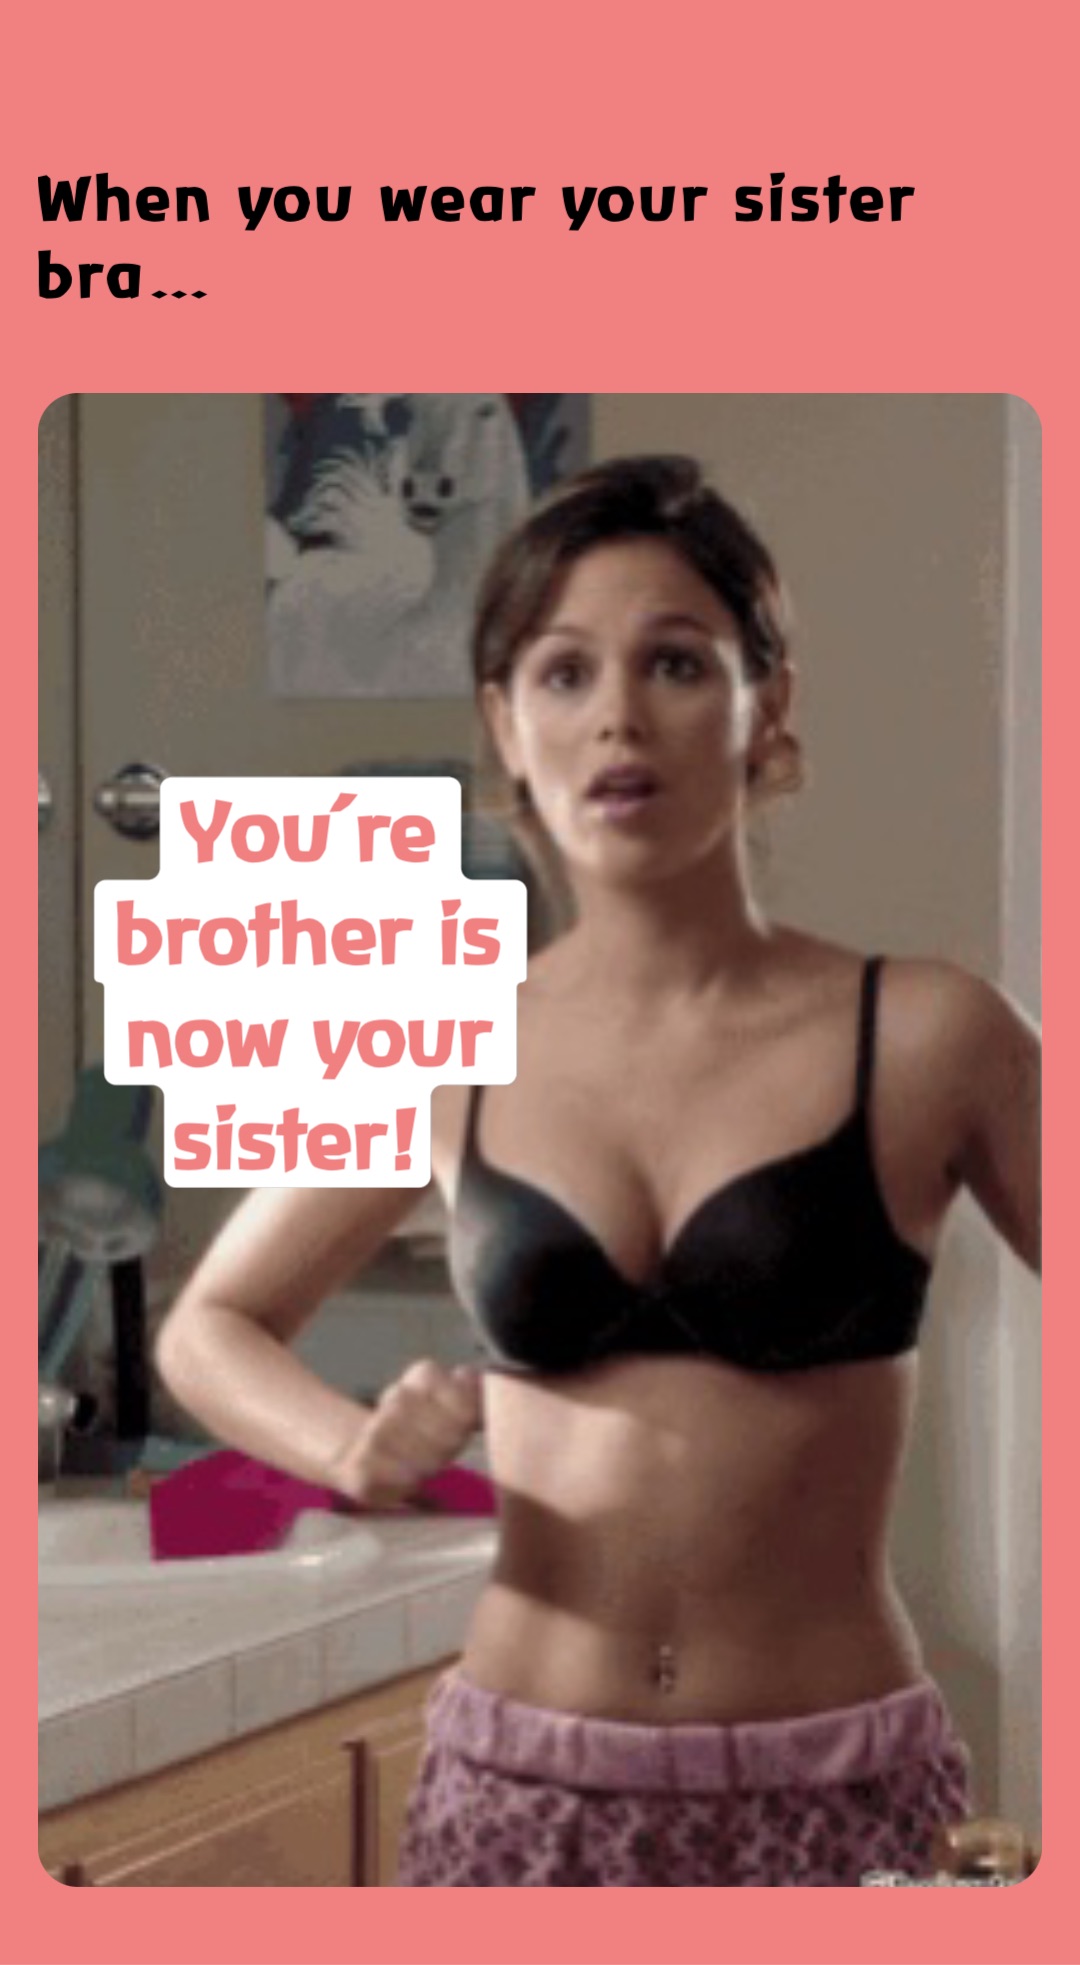 When you wear your sister bra… You're brother is now your sister